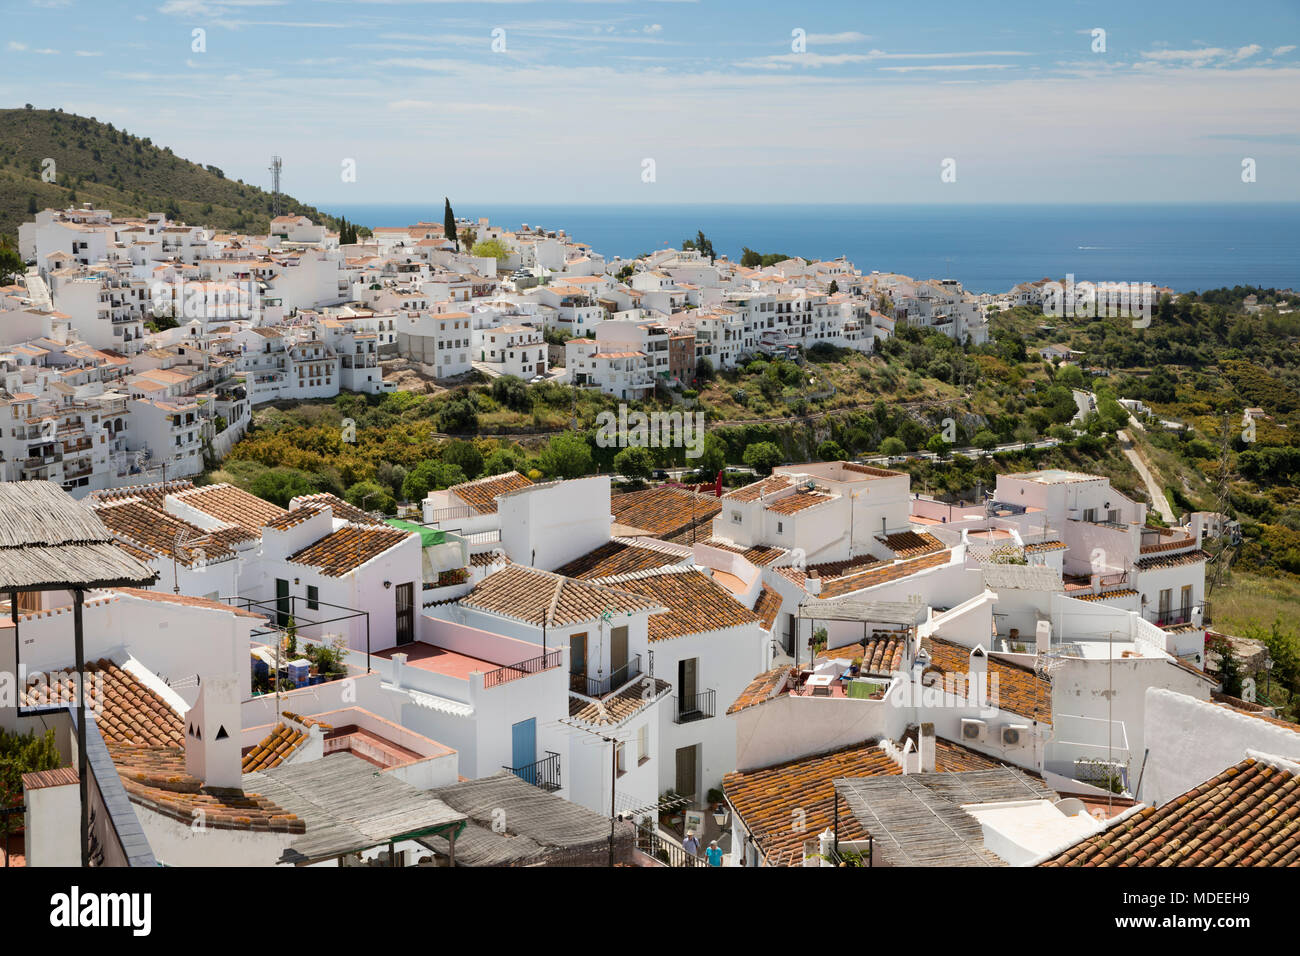 View over white Andalucian village with view to the sea, Frigiliana, Malaga Province, Costa del Sol, Andalucia, Spain, Europe Stock Photo